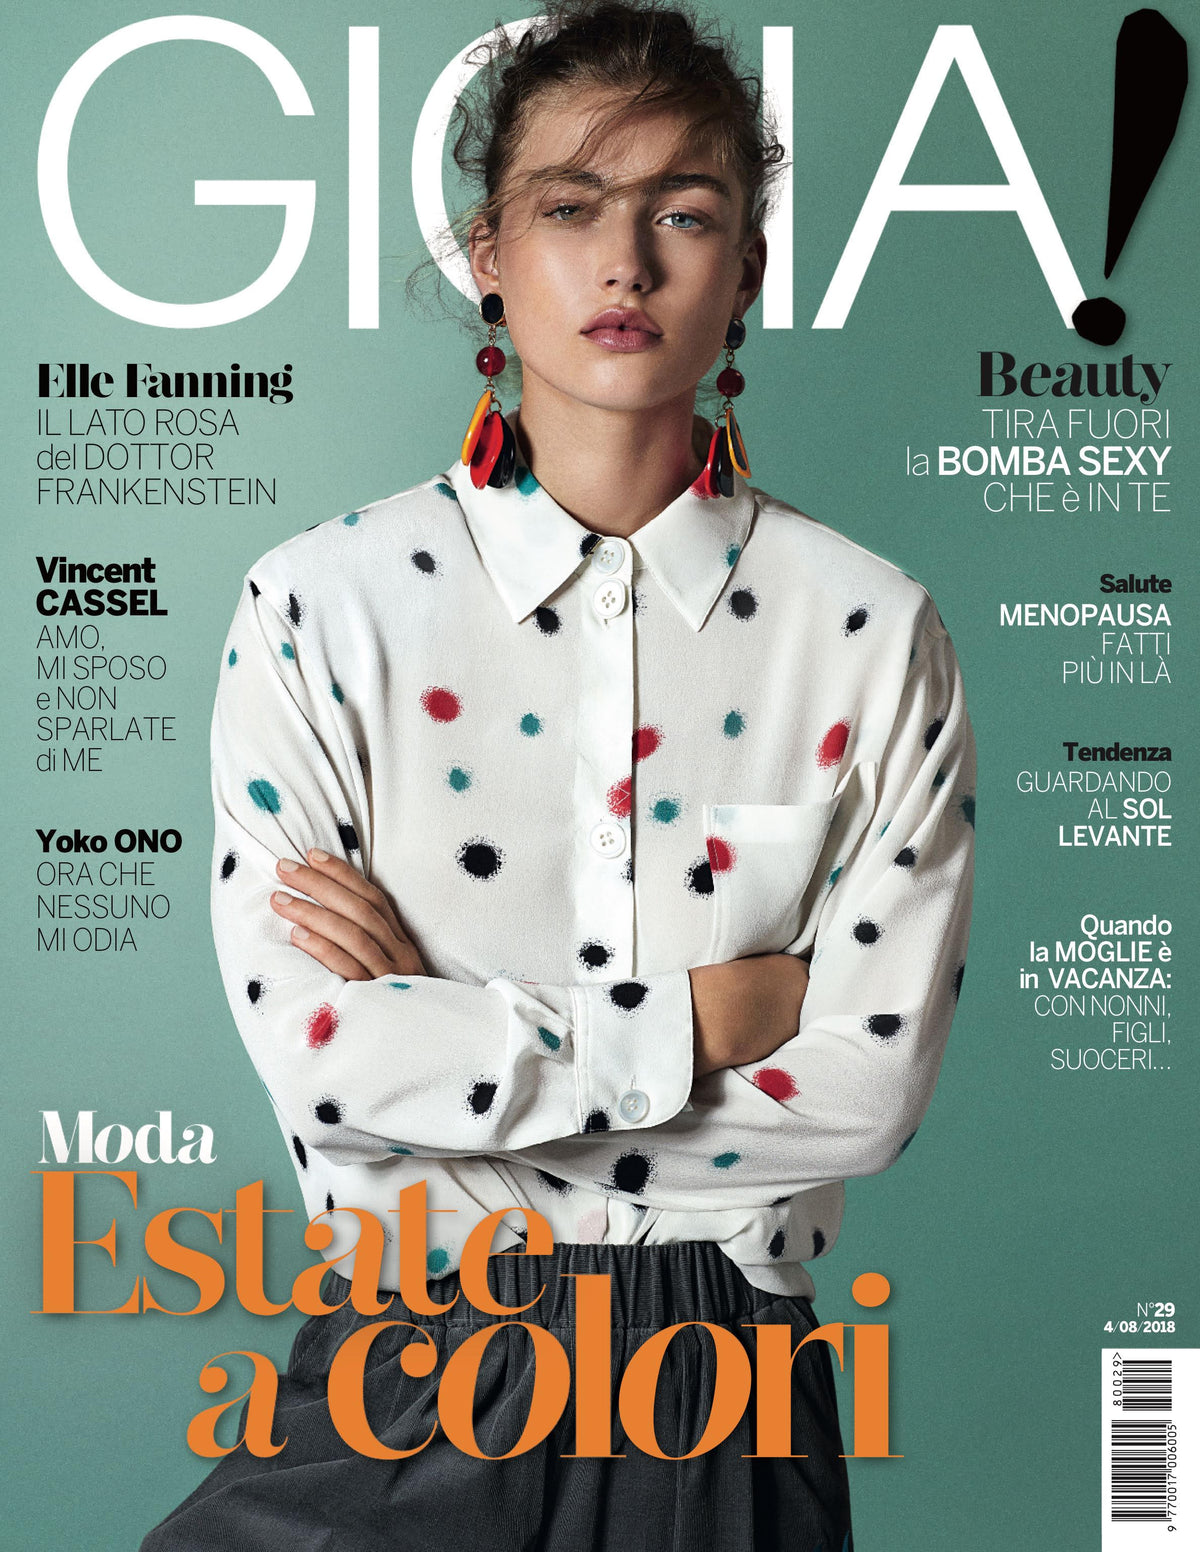 Lee Pfayfer dresses are featured in Gioia print issue